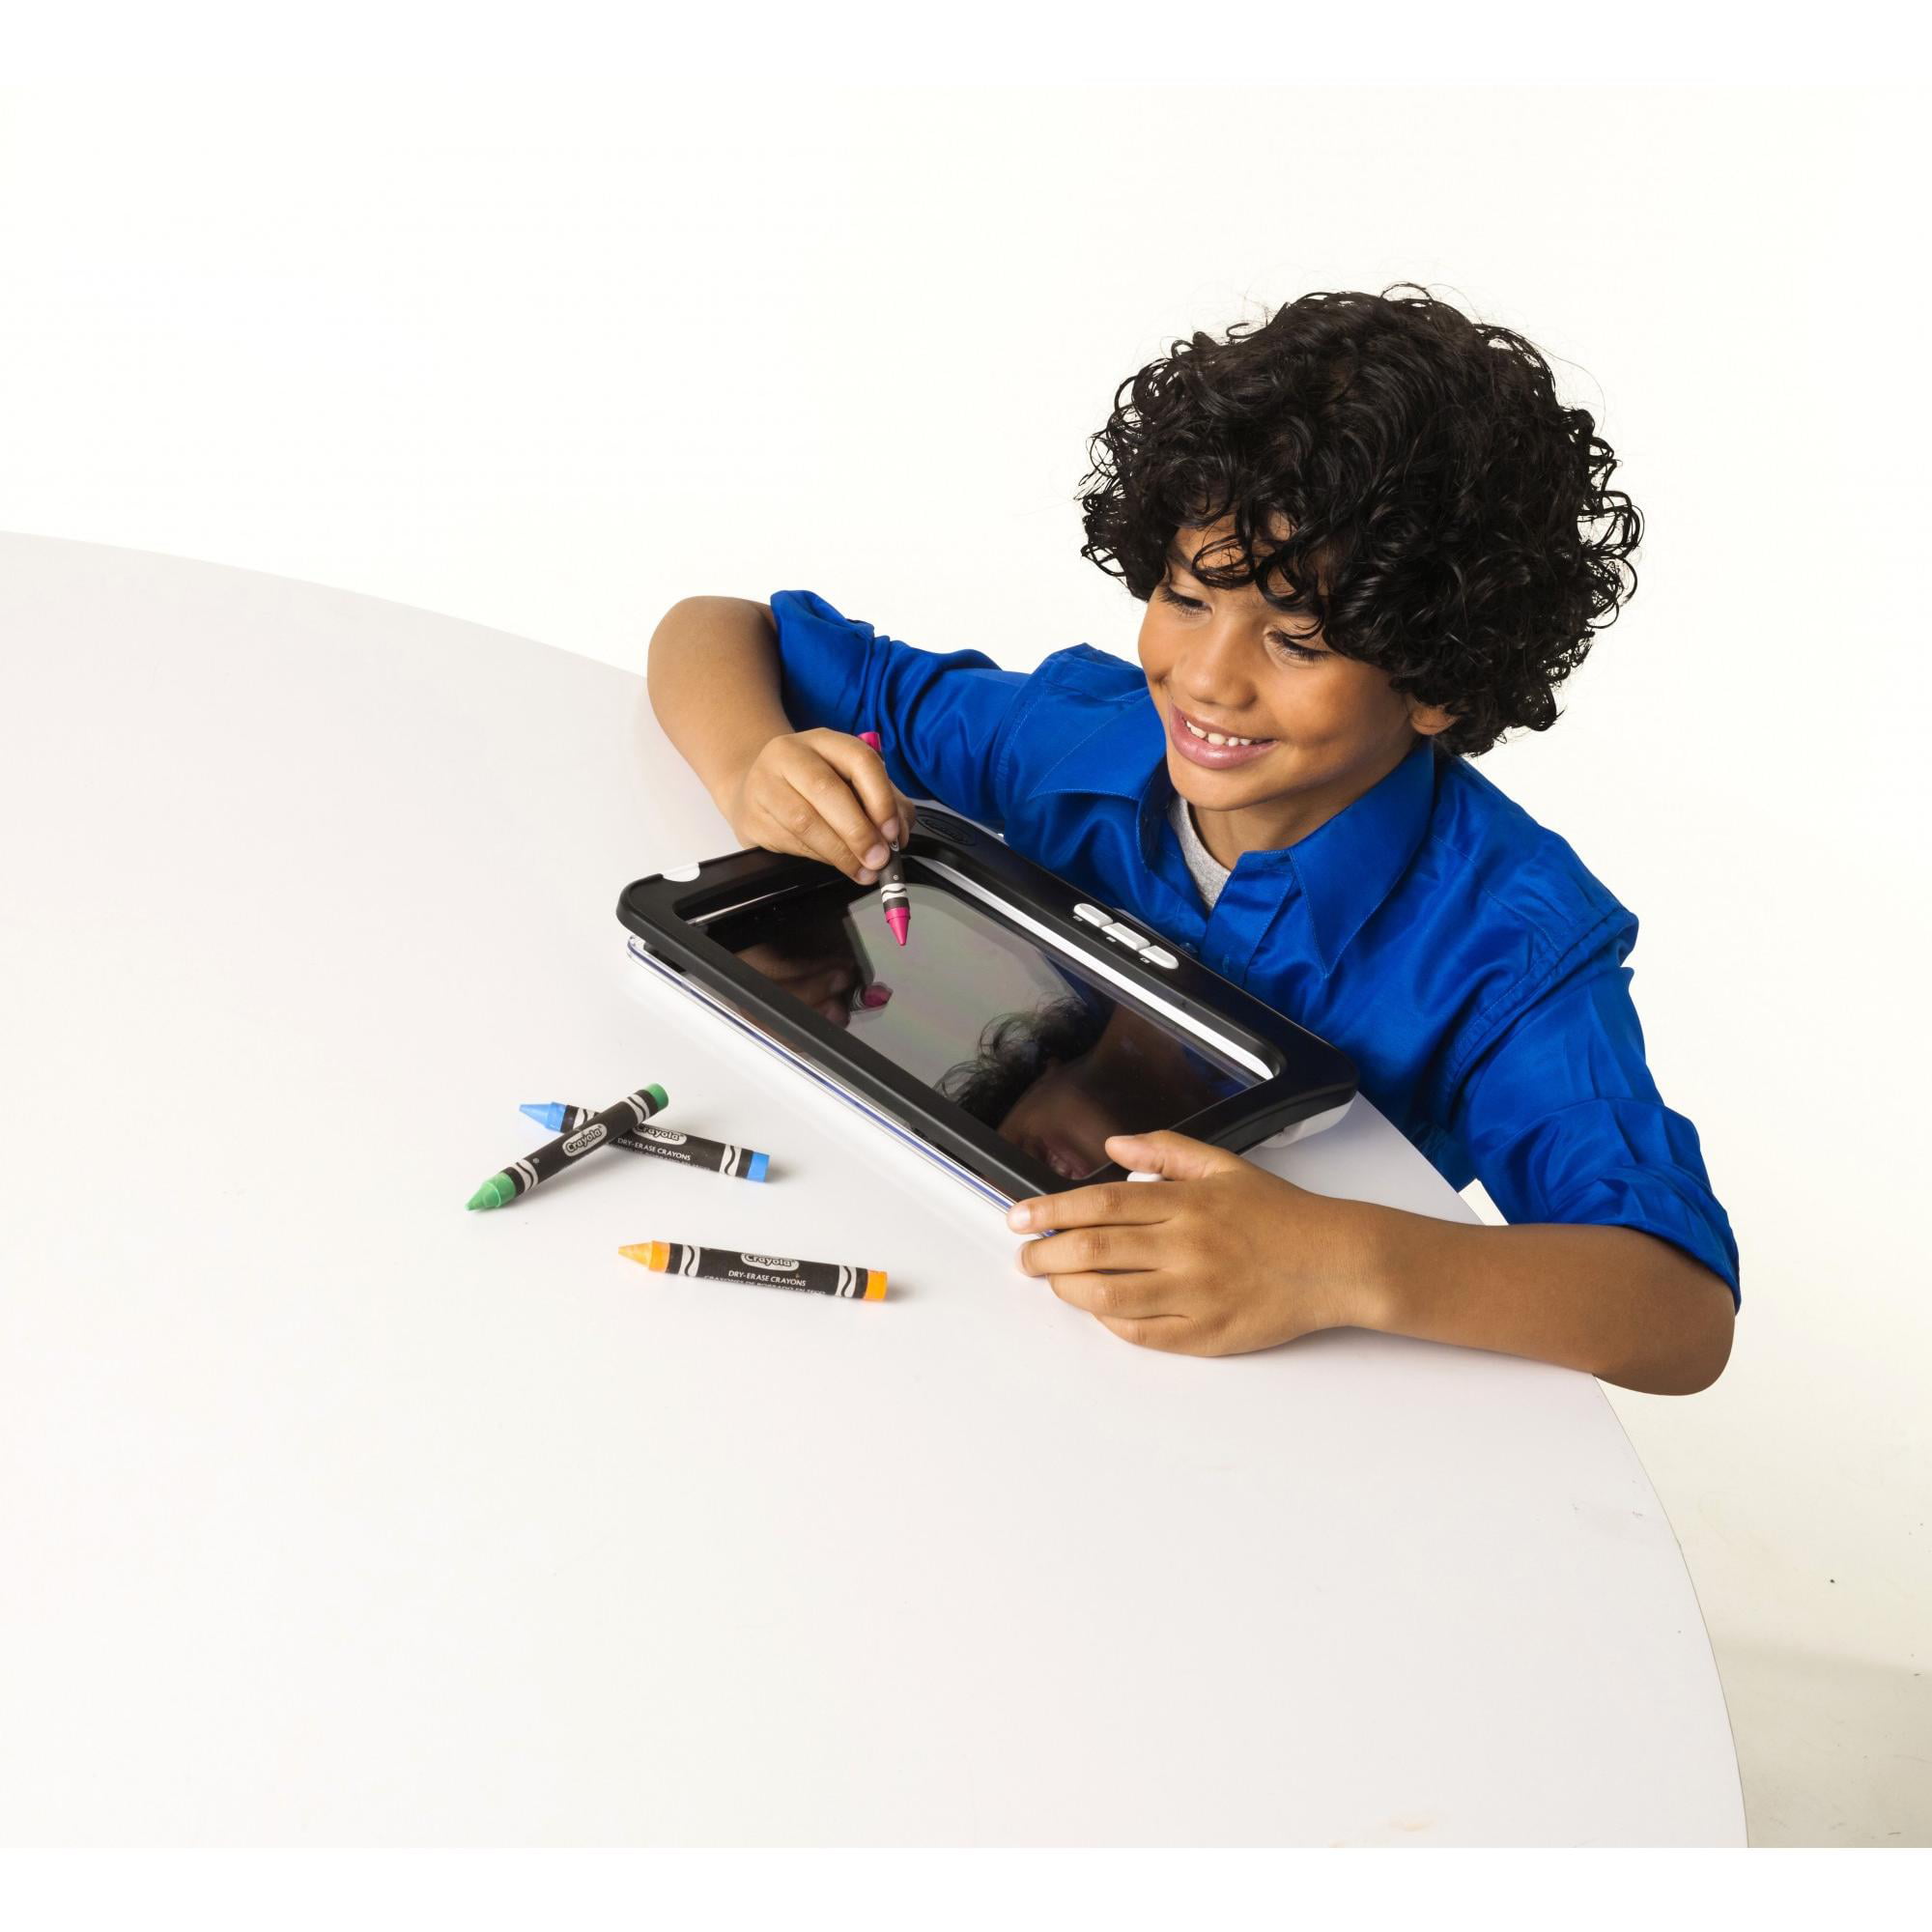 Crayola Dry Erase Light-Up Designer Review: Fun drawing board for